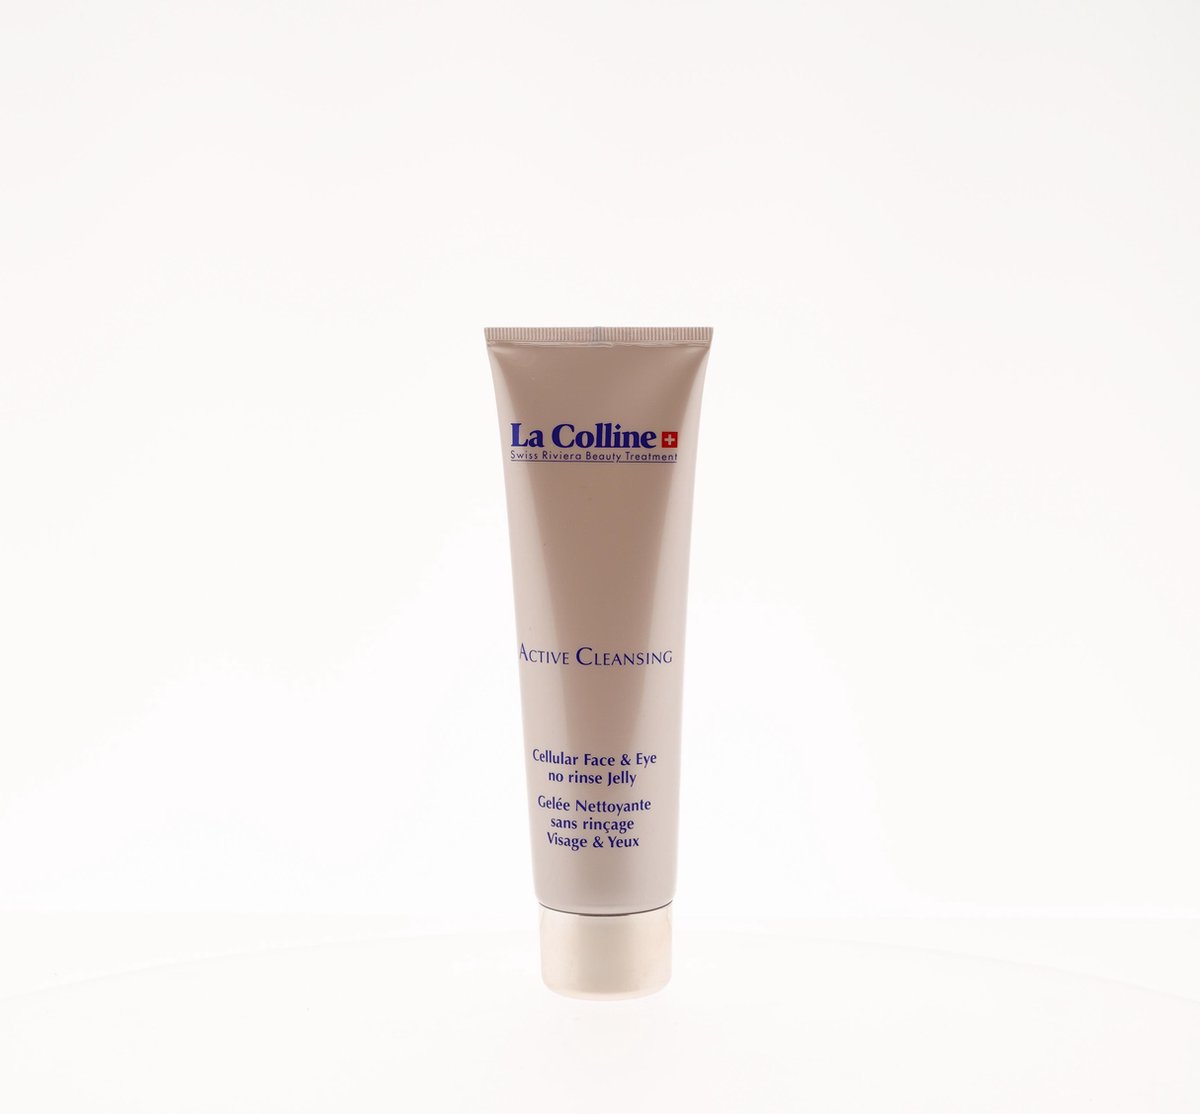 La Colline Active Cleansing Cellular Face & Eye no rinse jelly